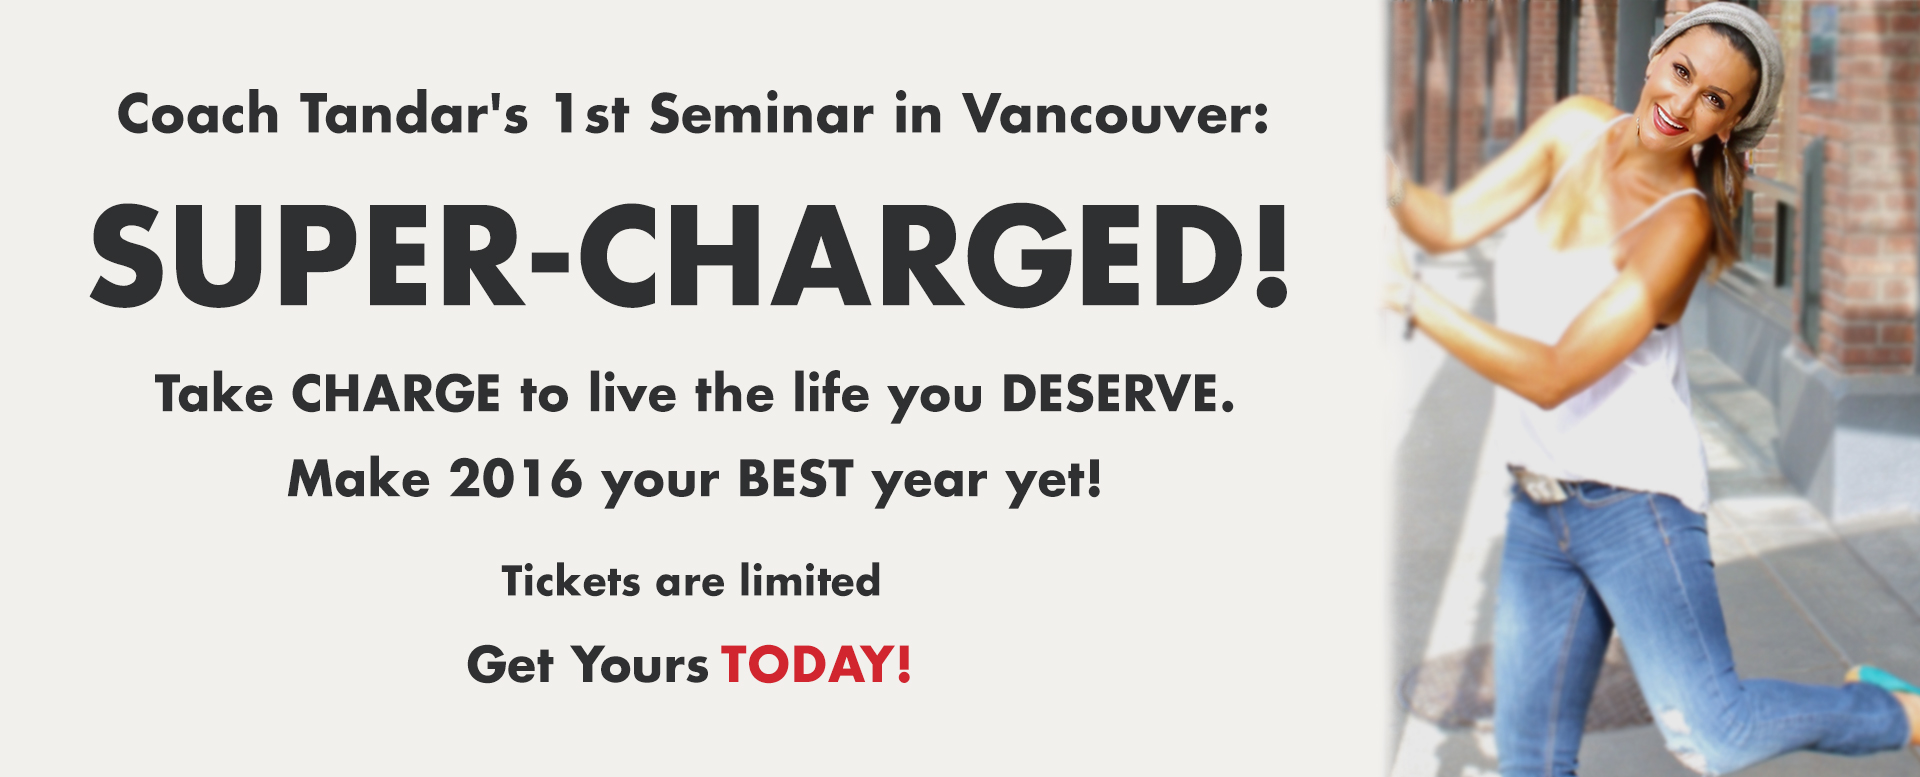 Vancouver Seminar - Super Charged